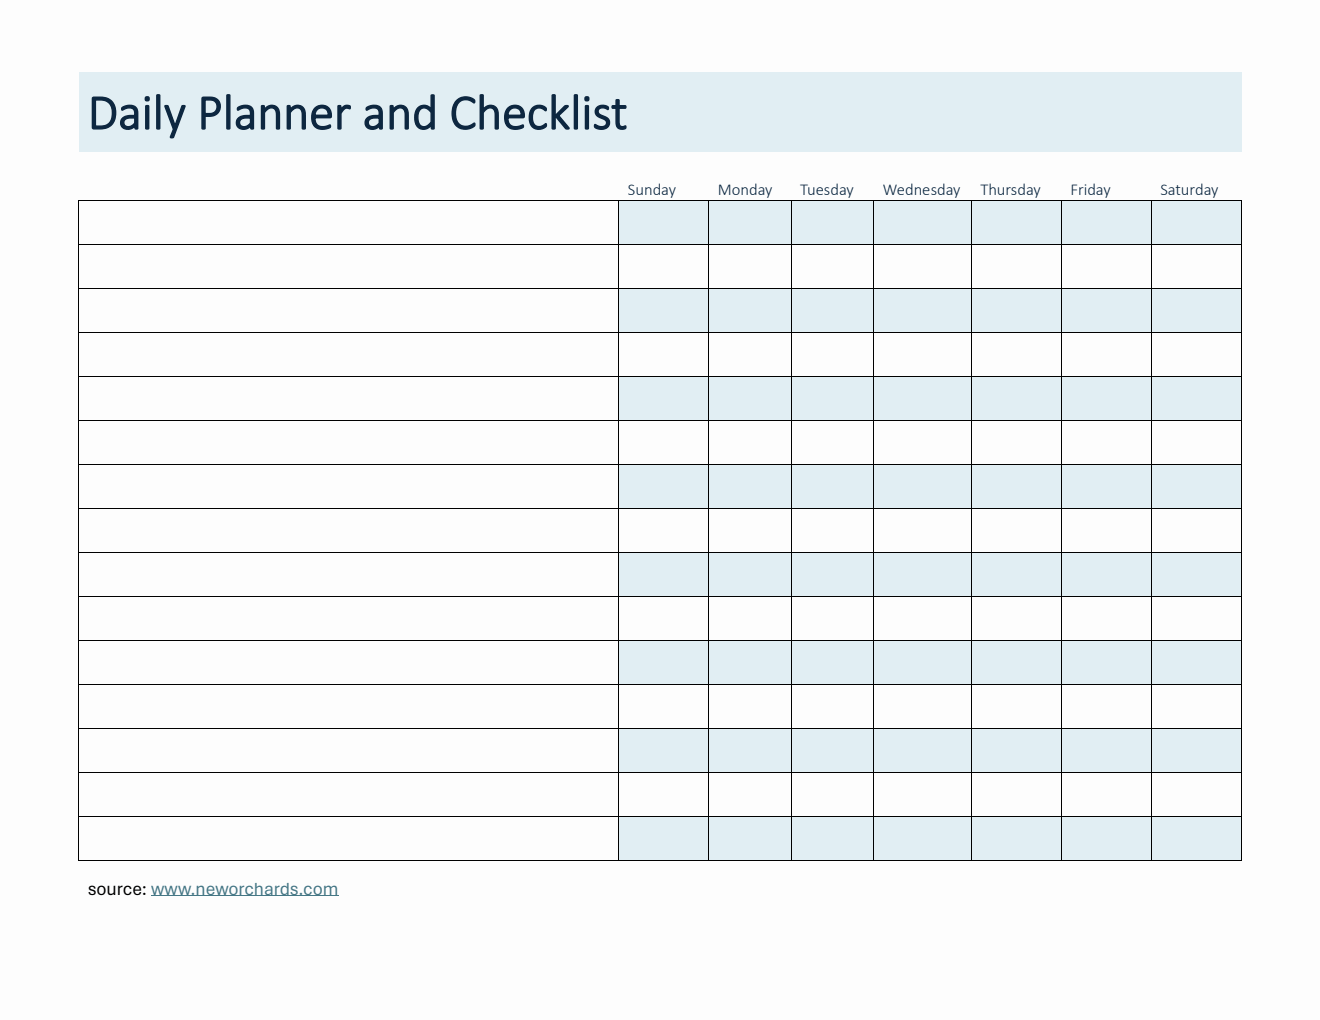 Daily Planner and Checklist Template in PDF (Blue)